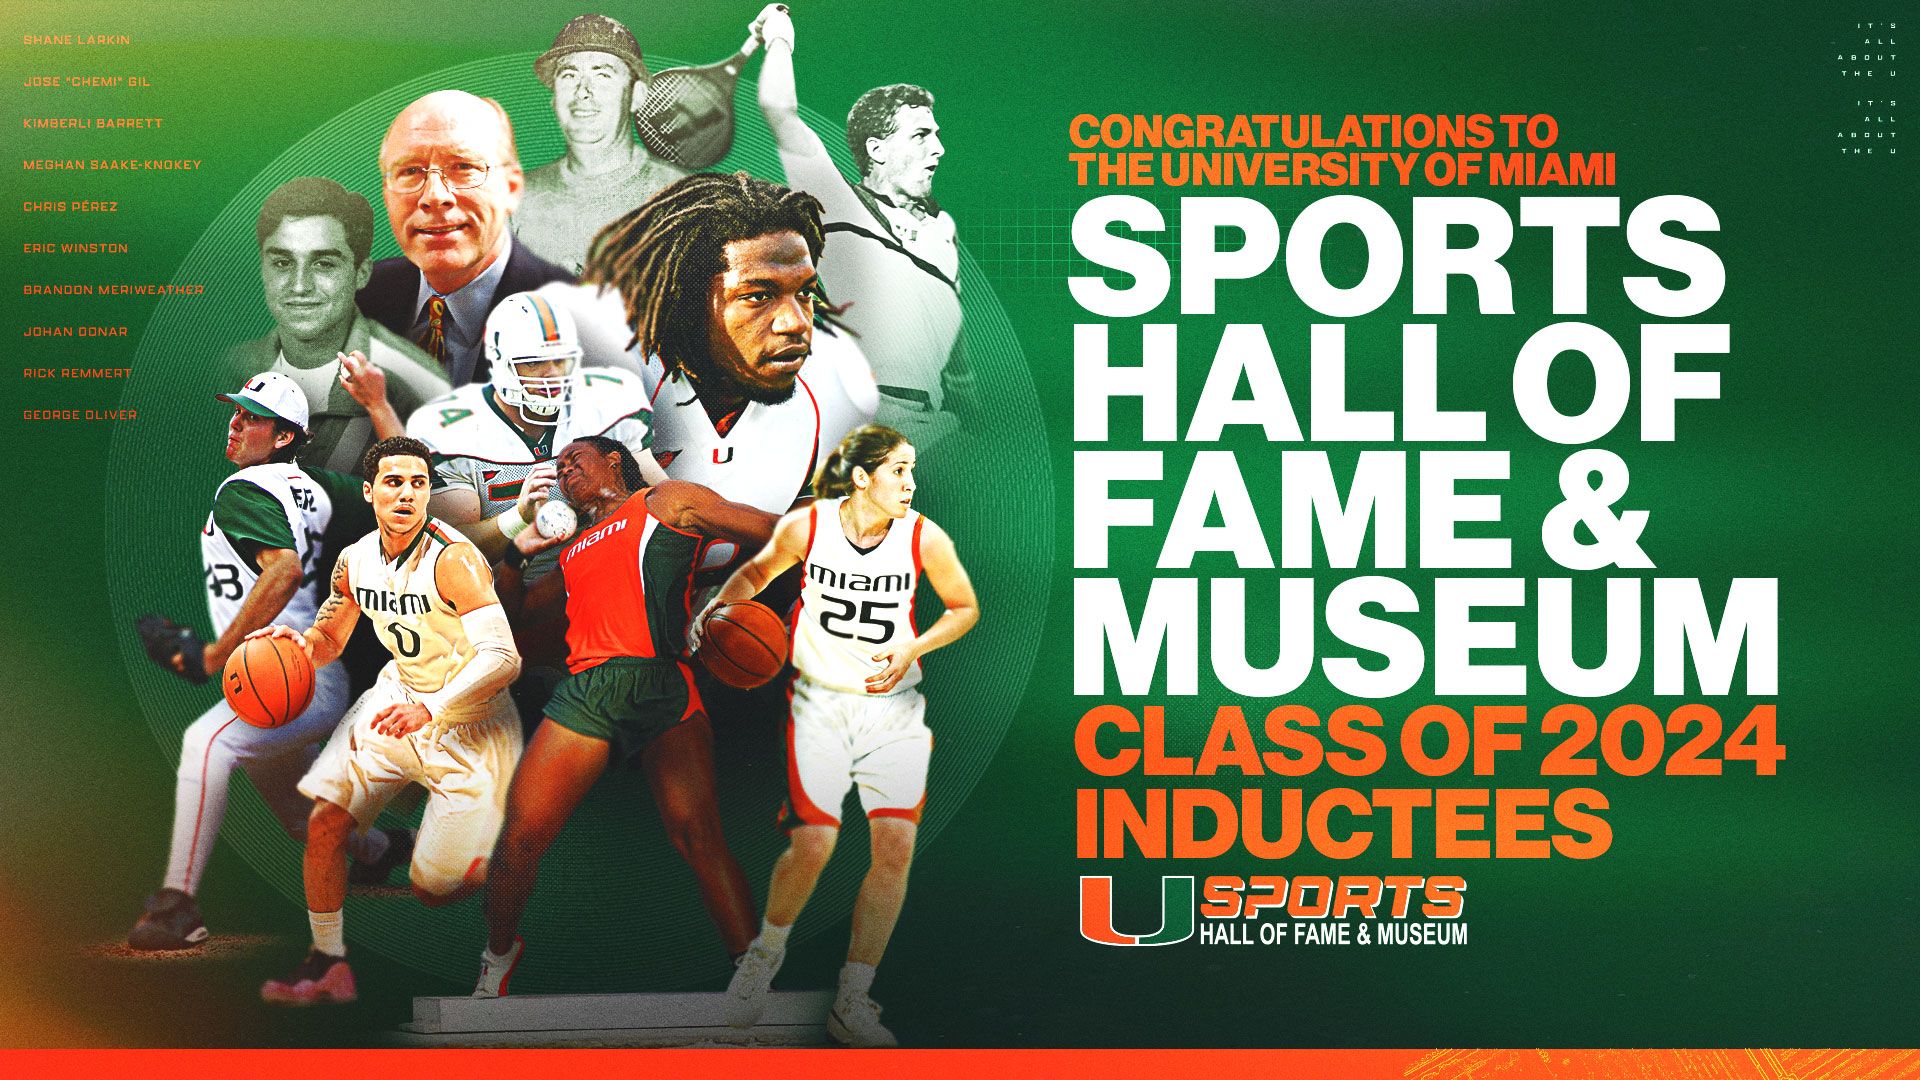 UM Sports Hall of Fame & Museum Induction Banquet Set For April 18 at Watsco Center